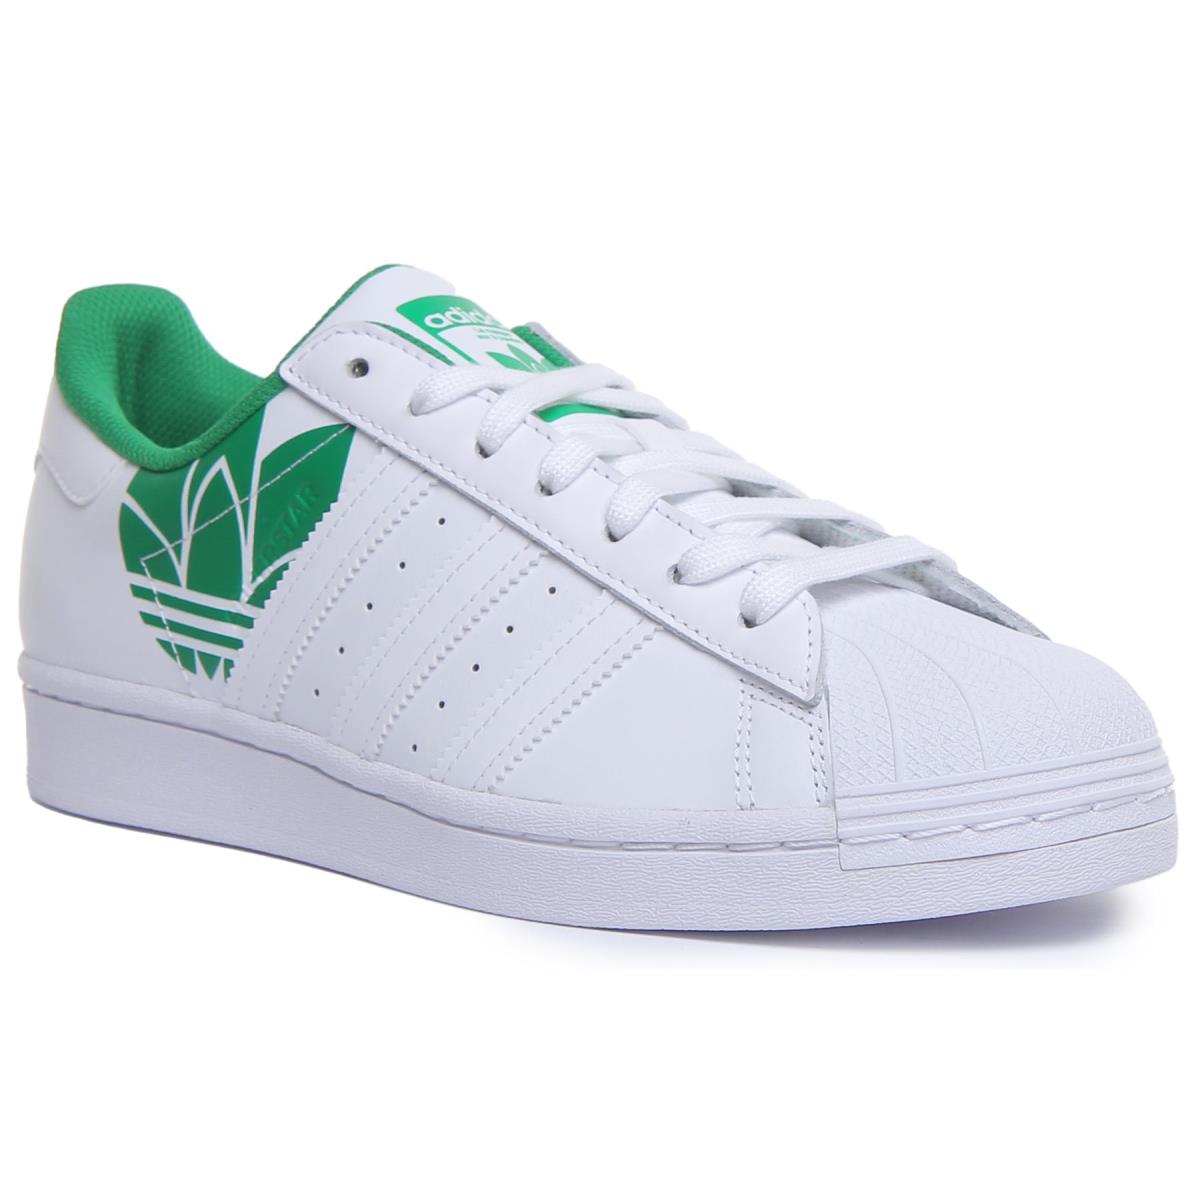 Adidas Originals Superstar Exploded Logo In White Green Size US 7 - 13 WHITE GREEN